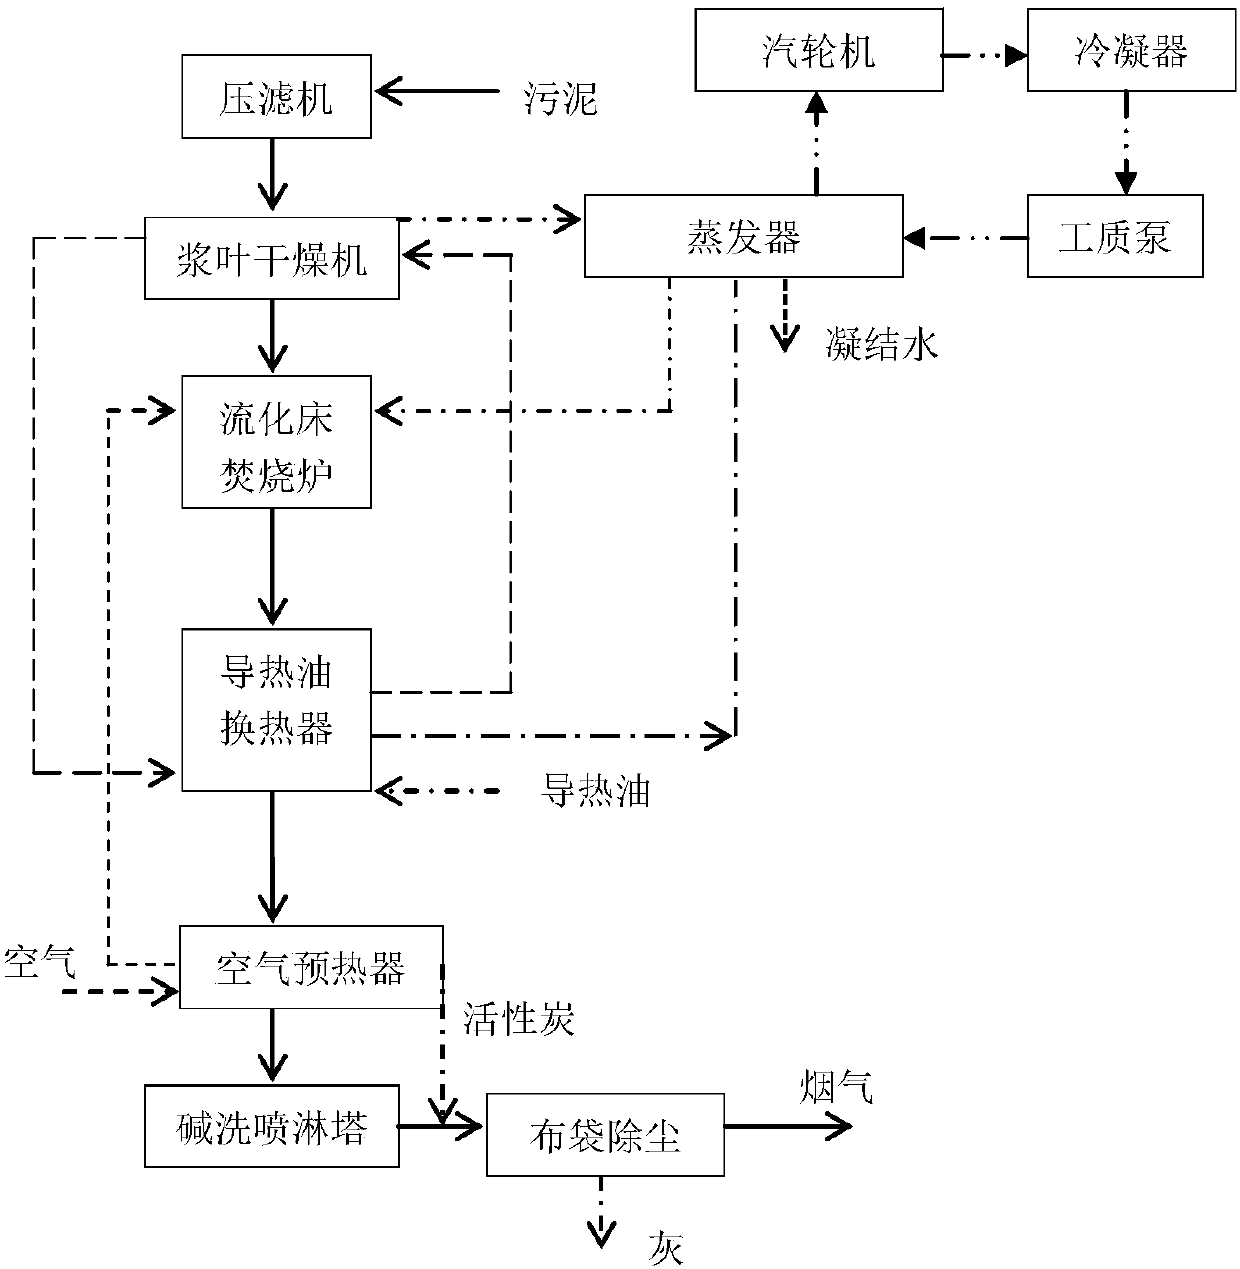 Energy recovery type sludge drying and incineration system